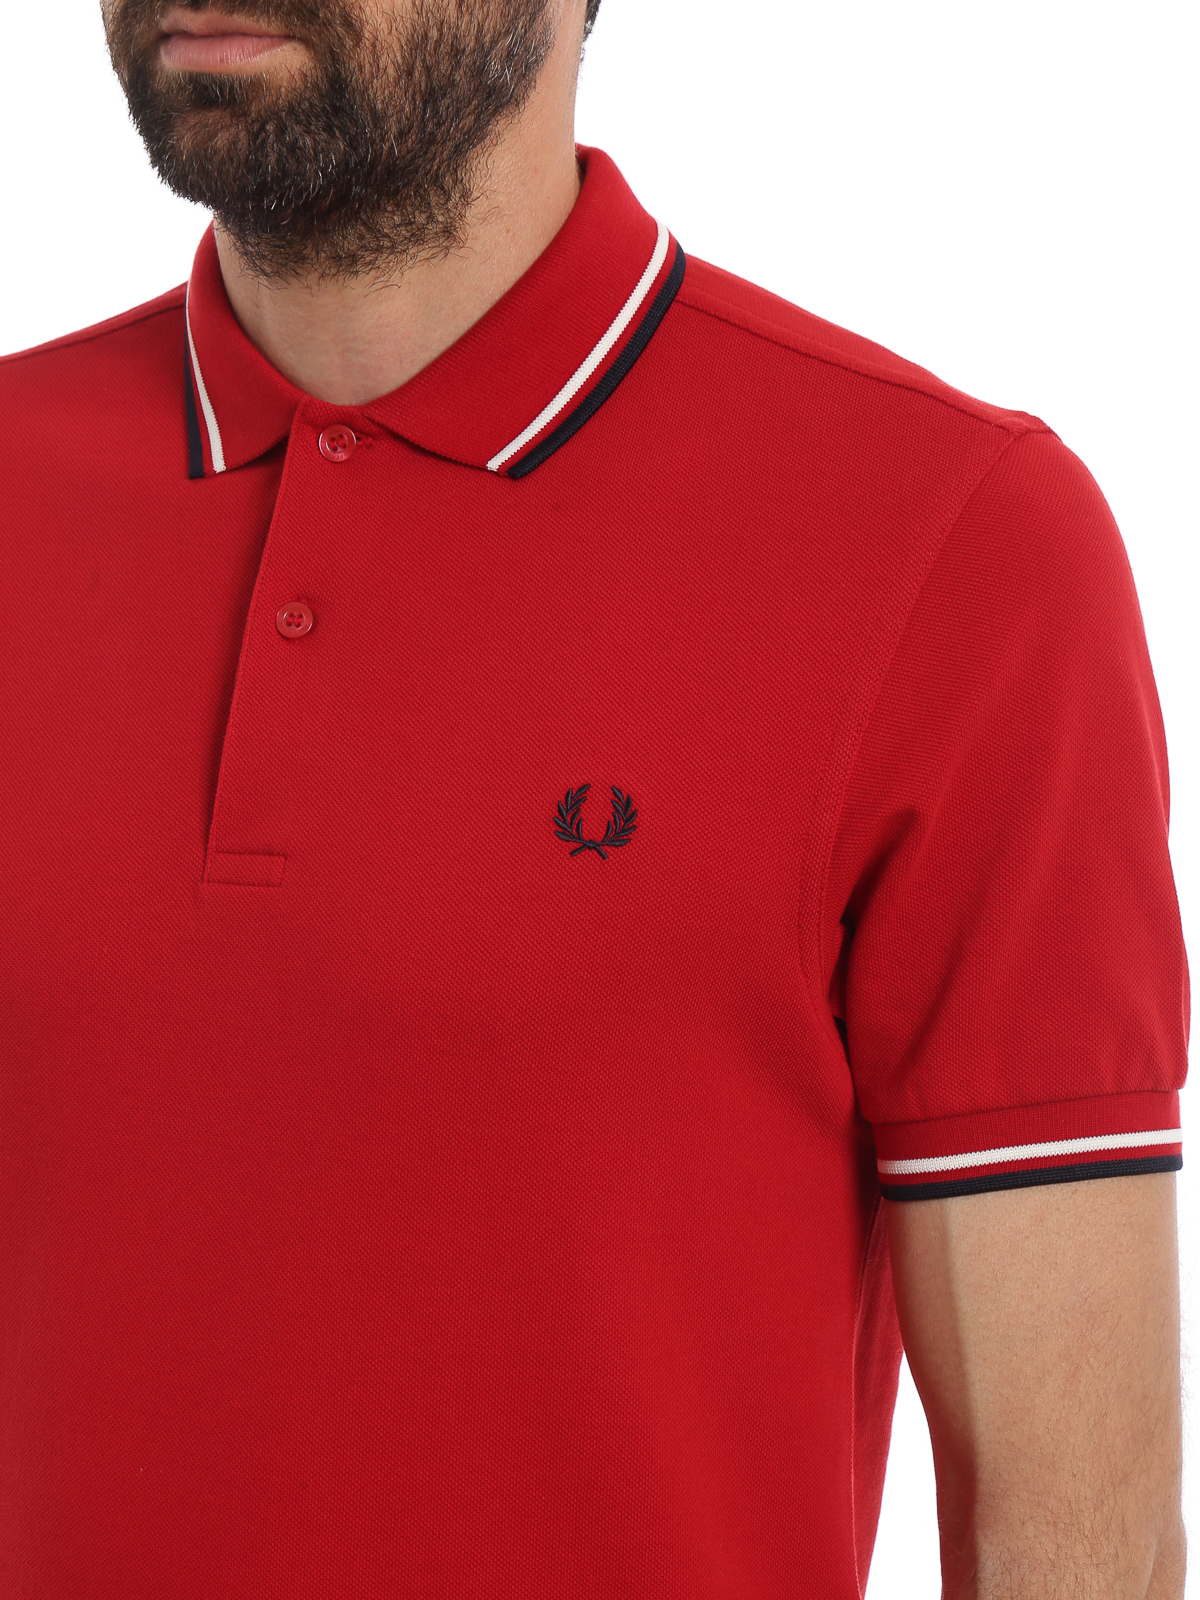 Herkenning Gedrag Catastrofe Polo shirts Fred Perry - Red cotton piqué polo shirt - M3600401